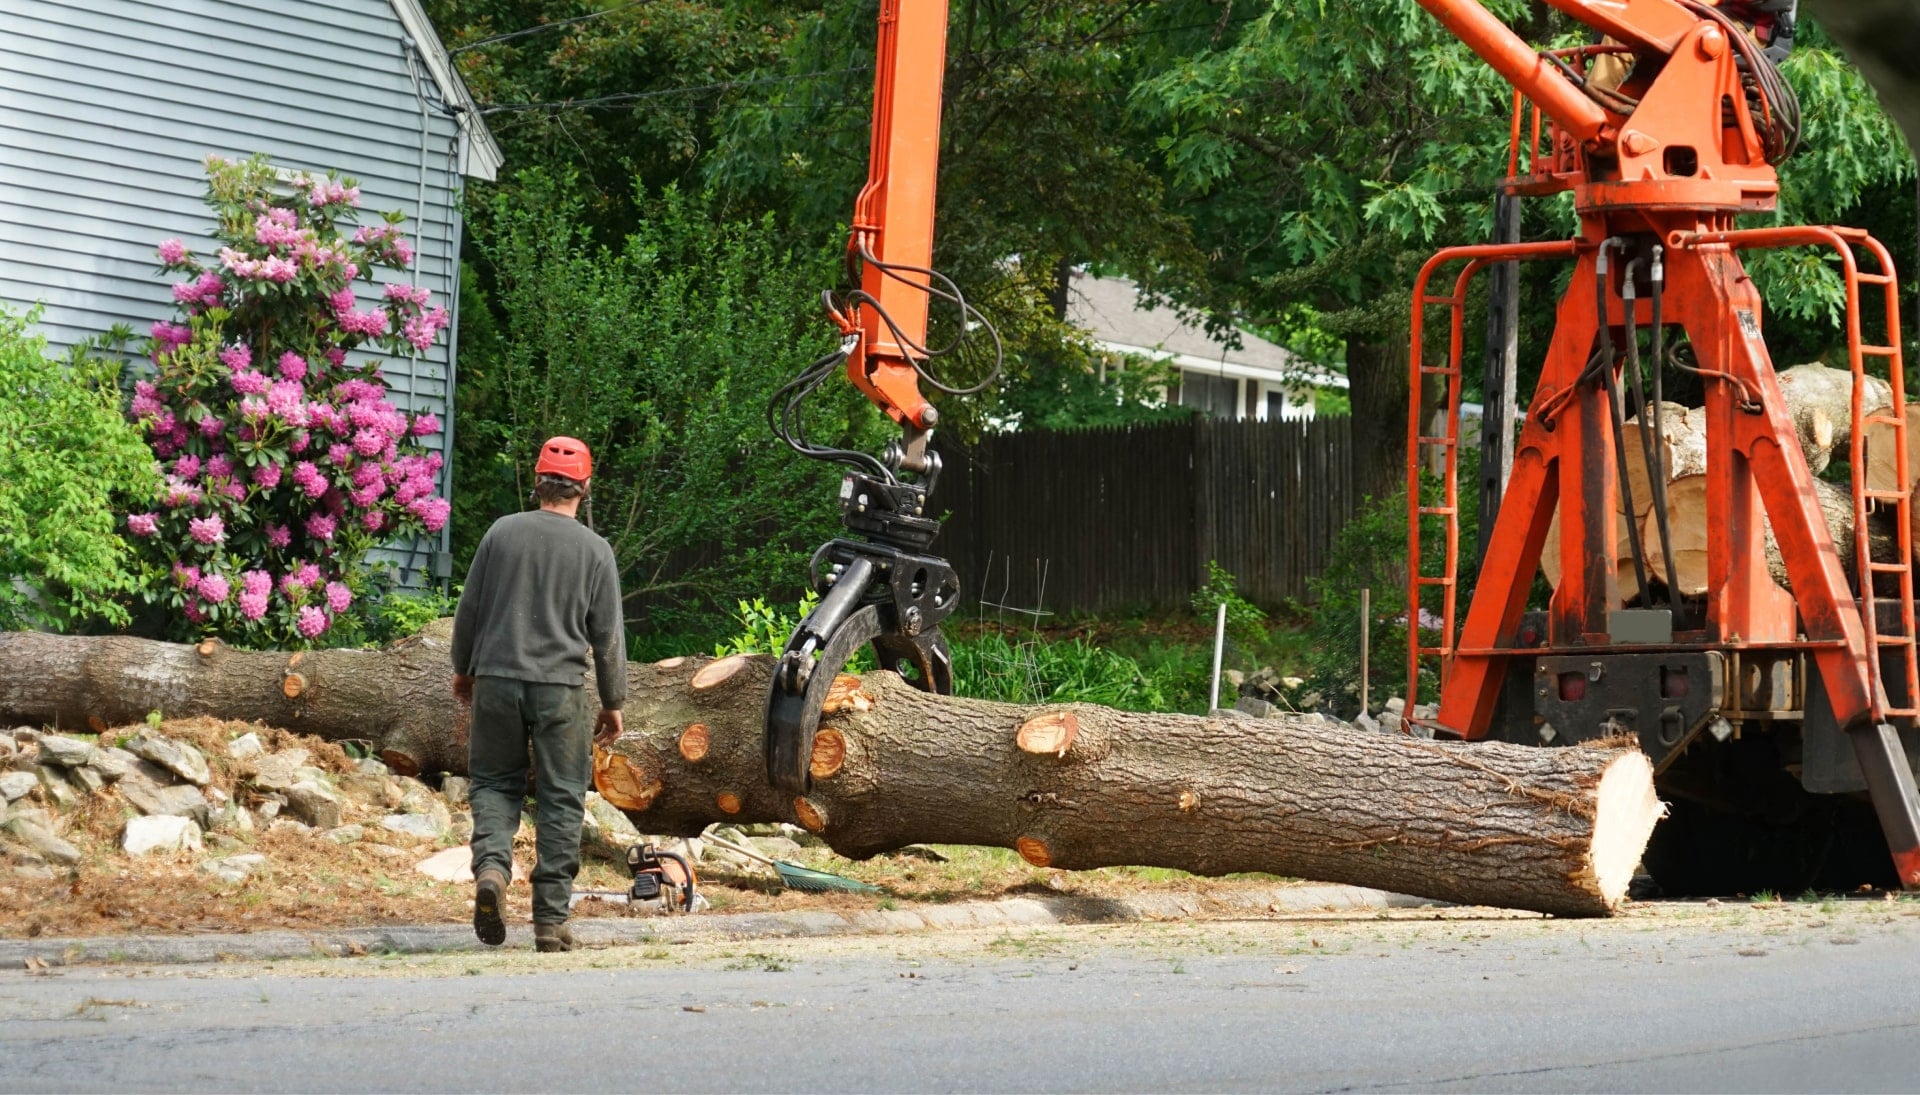 Local partner for Tree removal services in Dallas